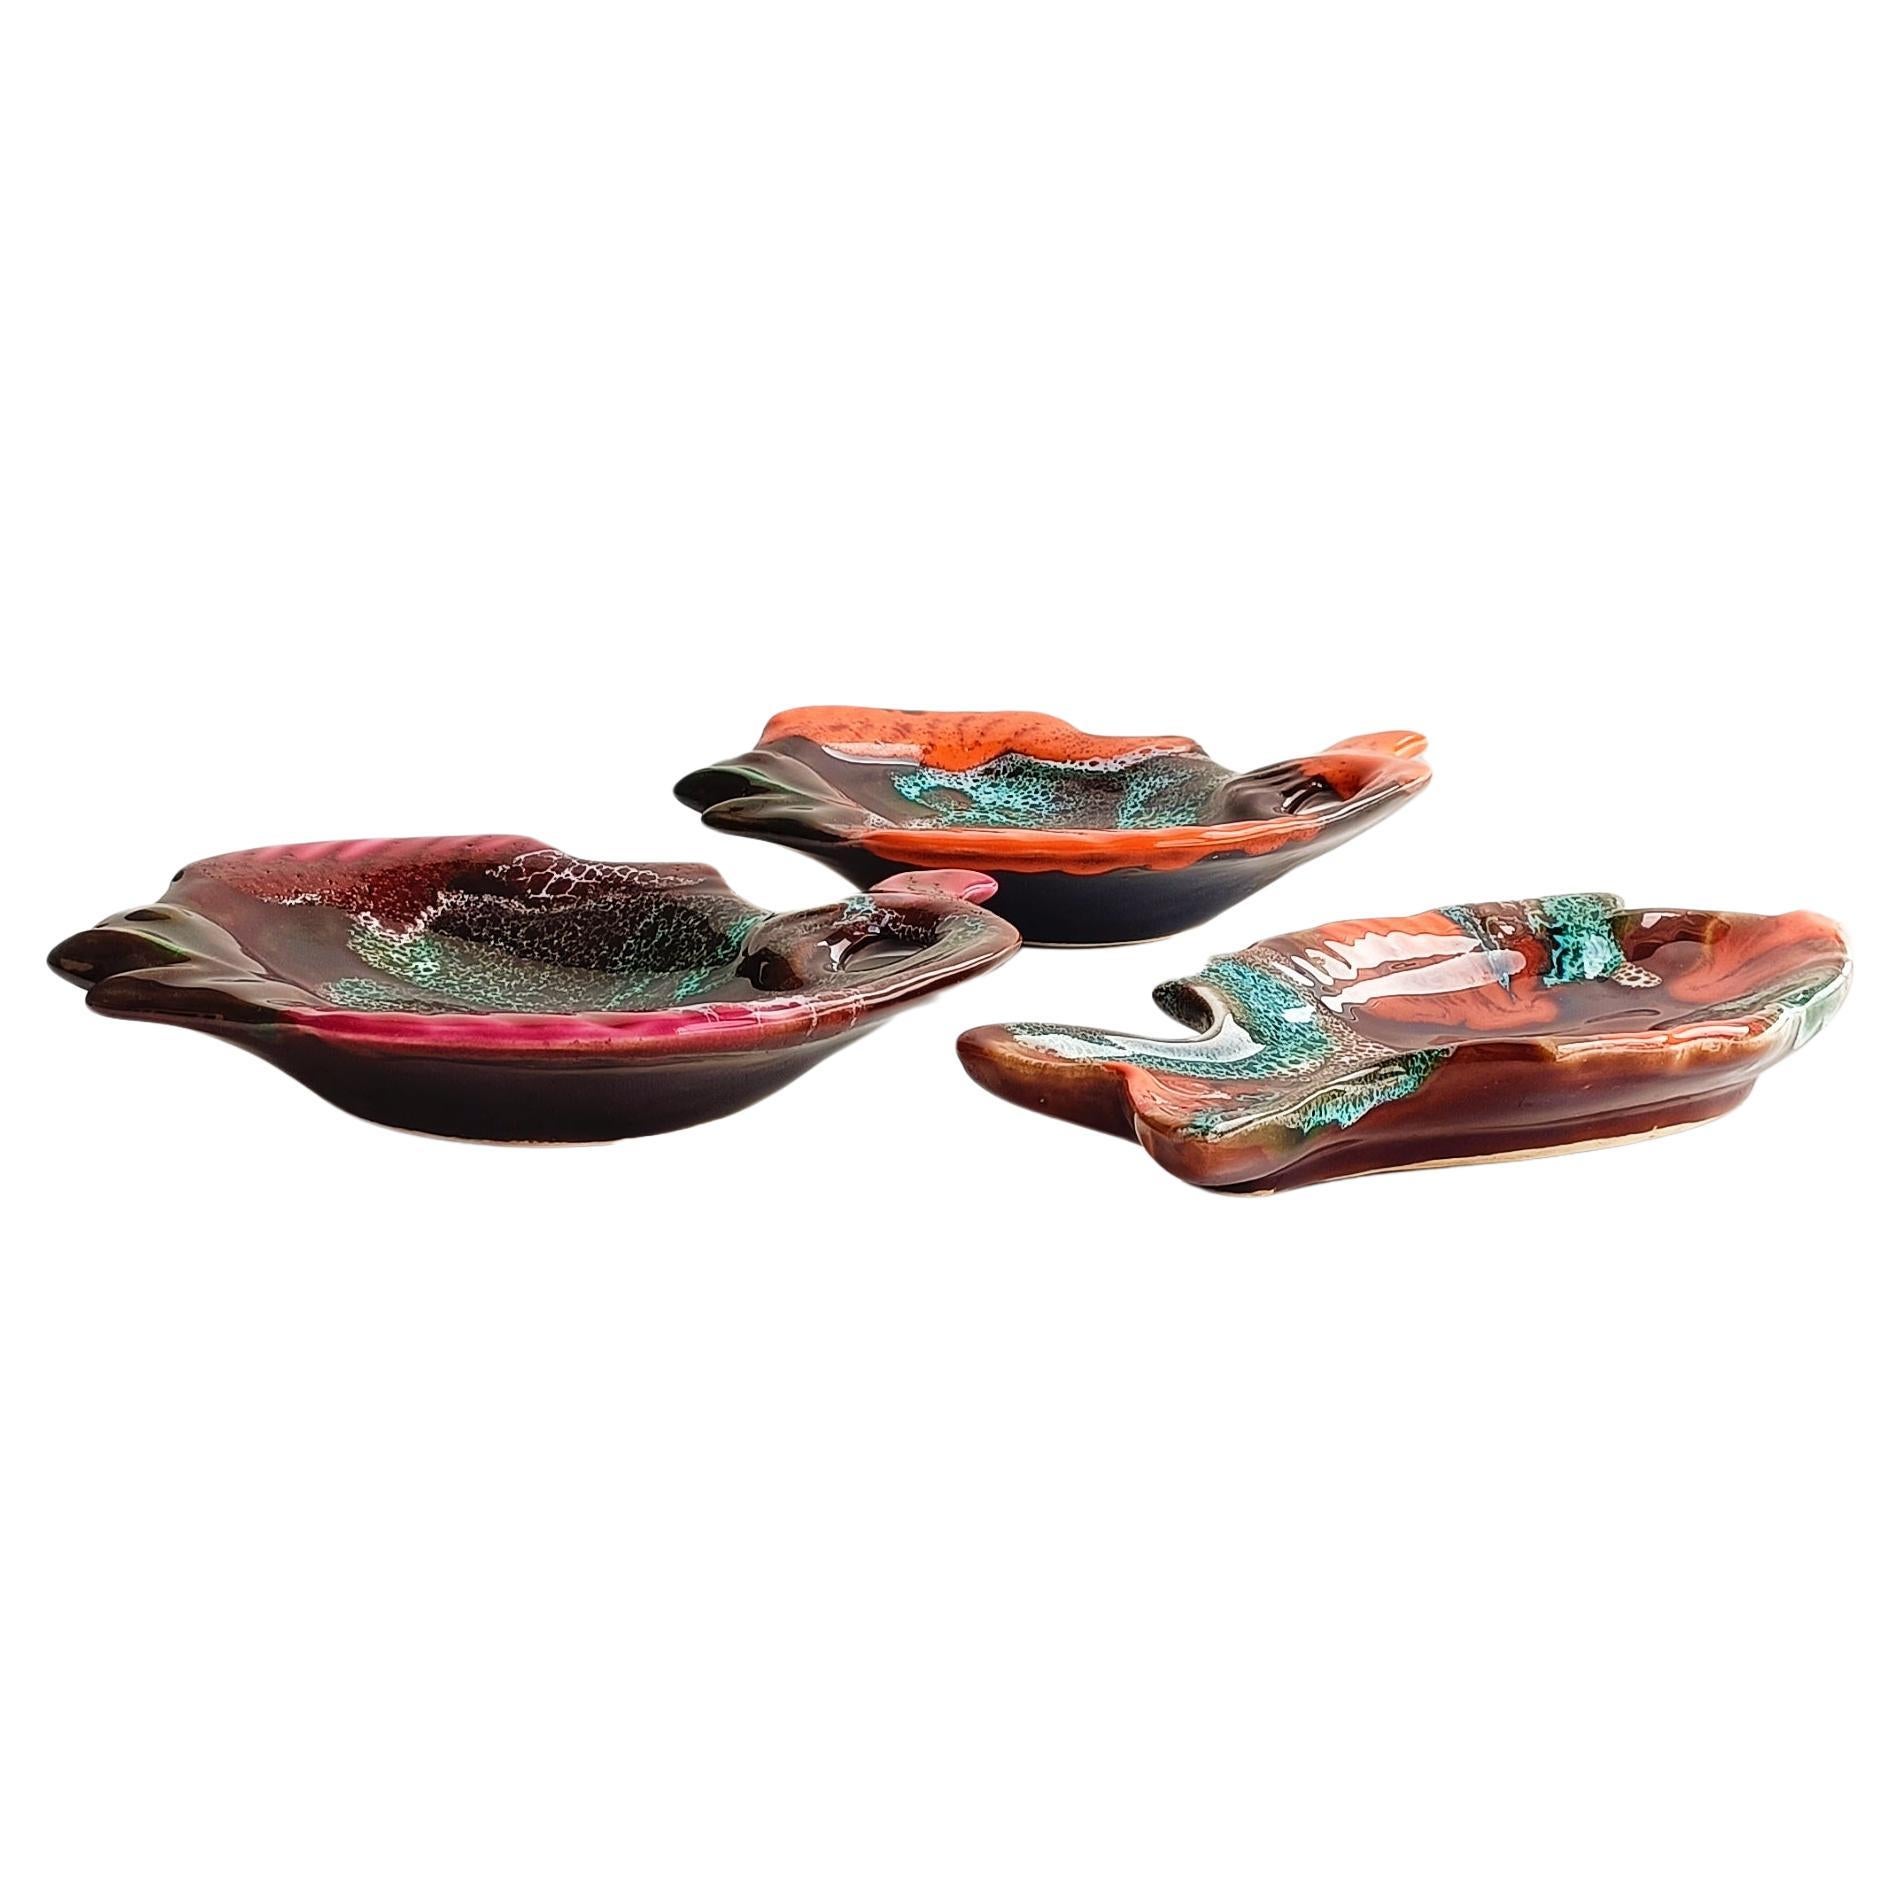 Vintage French Vallauris Signed Fat Lava Ceramic Fish Sculpture-Trays, 1950s For Sale 4